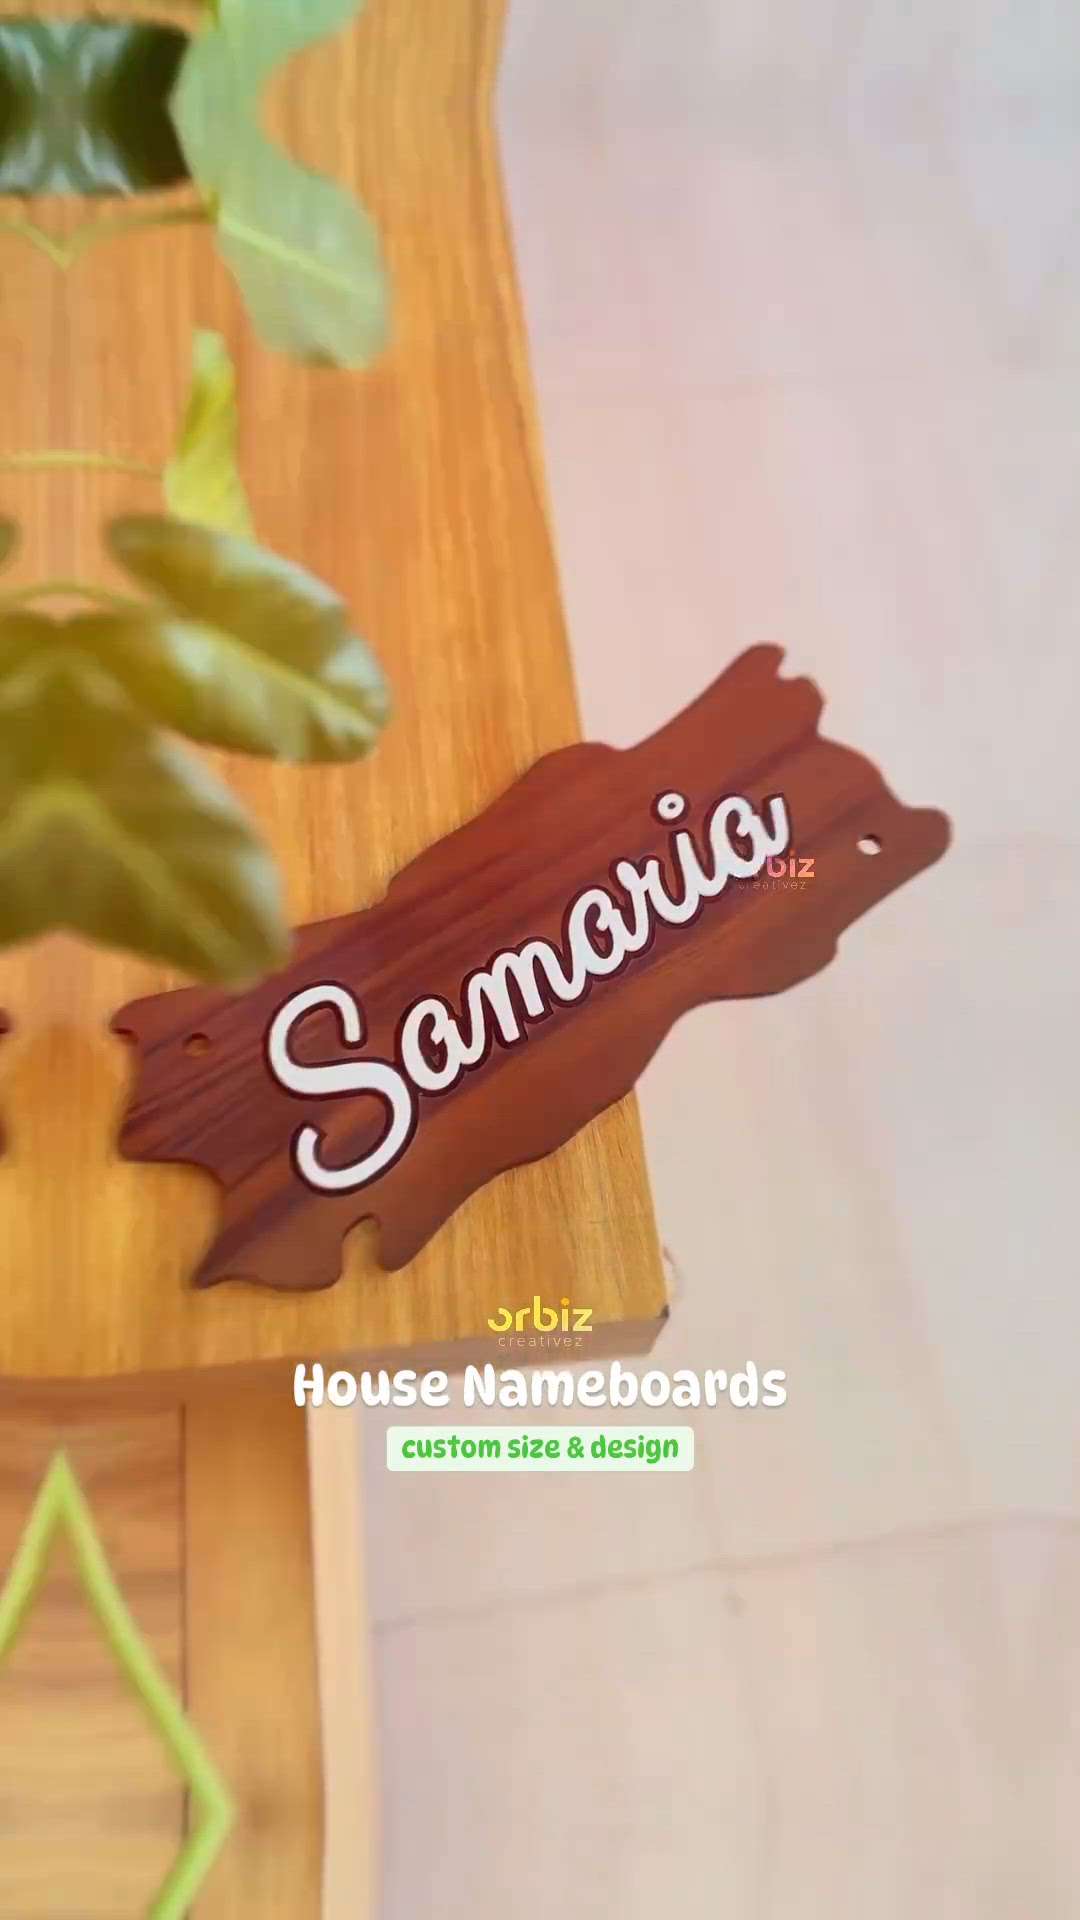 Custom nameboards available

100+ designs
DM for your customization

shop online www.orbiz.in

#nameboards #customnameboards #housenameplates